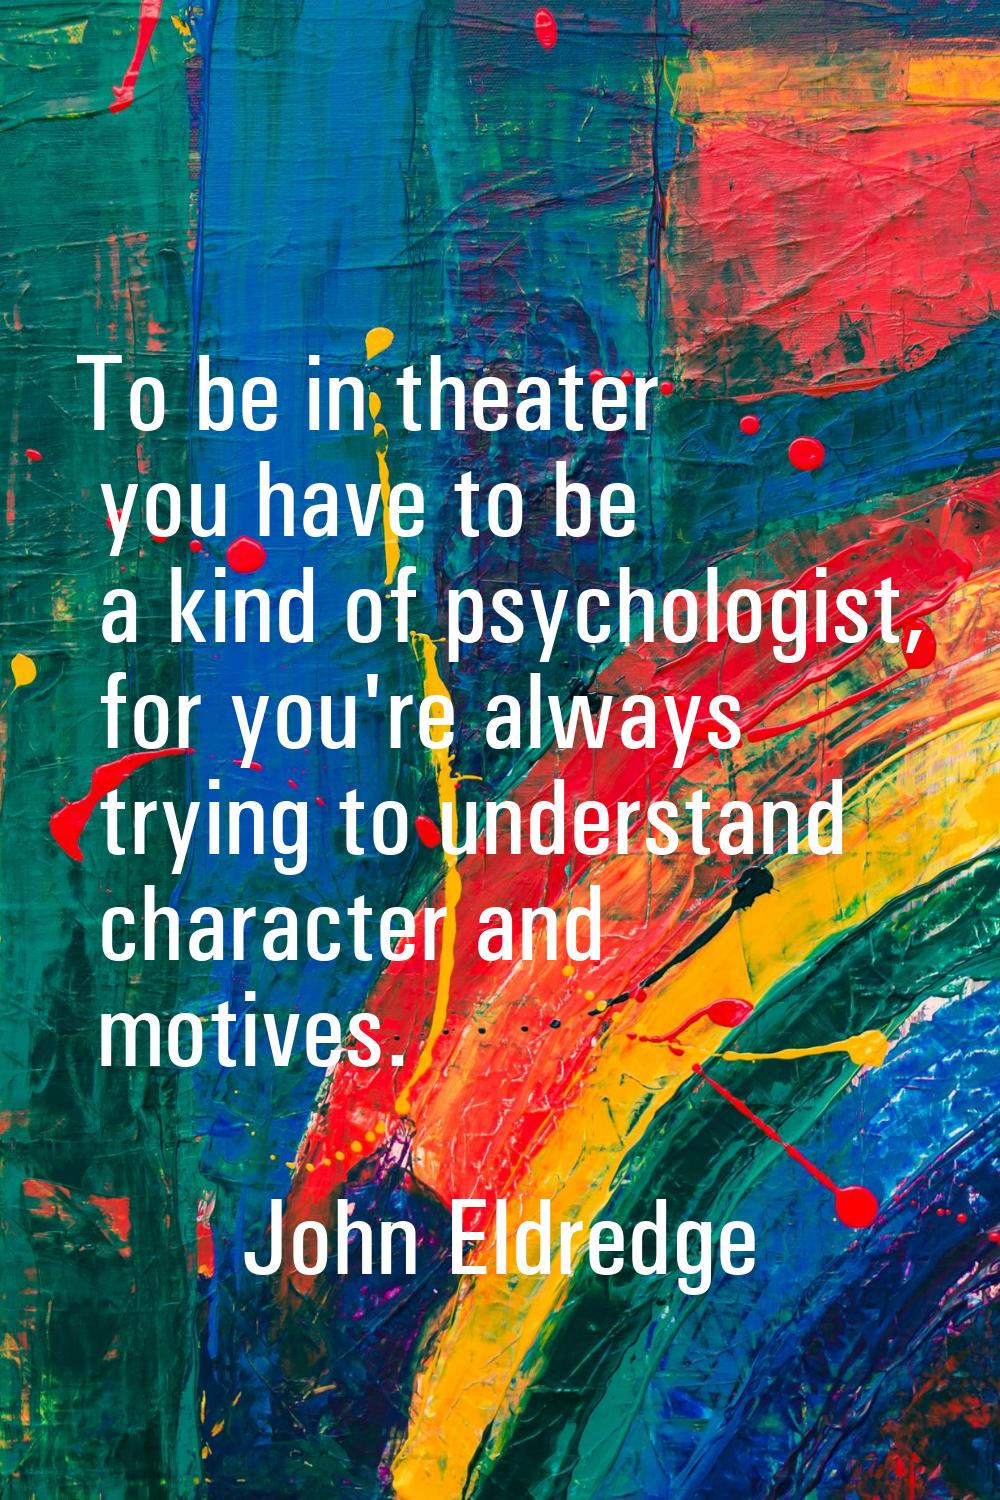 To be in theater you have to be a kind of psychologist, for you're always trying to understand char